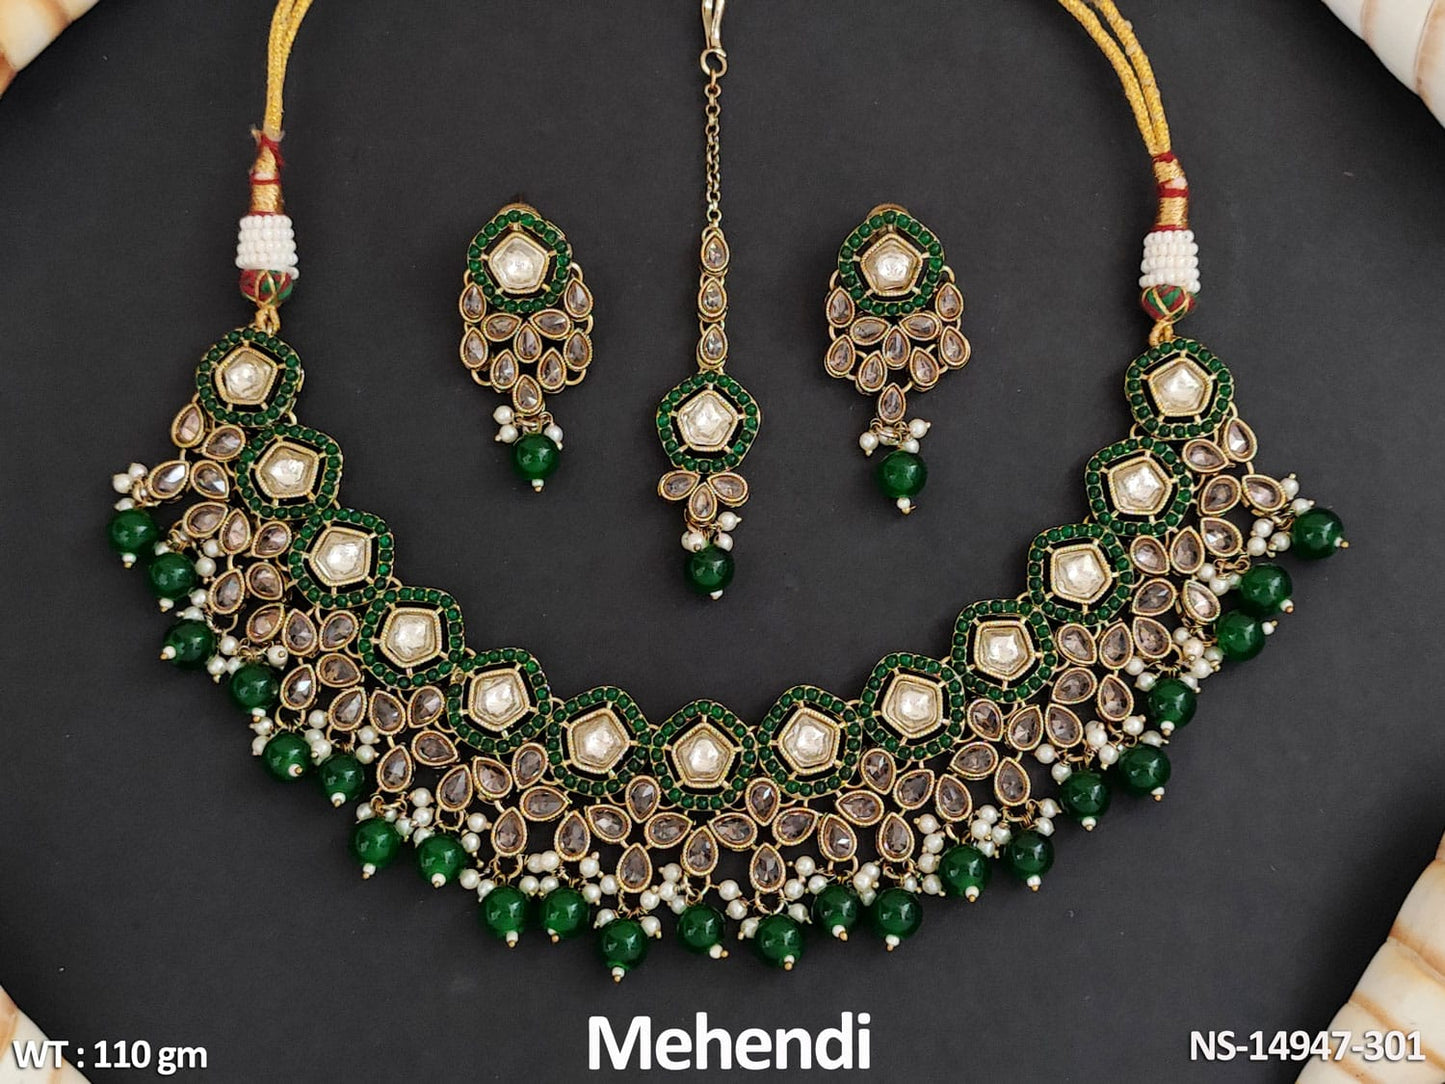 Expertly crafted from brass metal, this Short Necklace Set features an antique design with intricate Mehendi Polish.